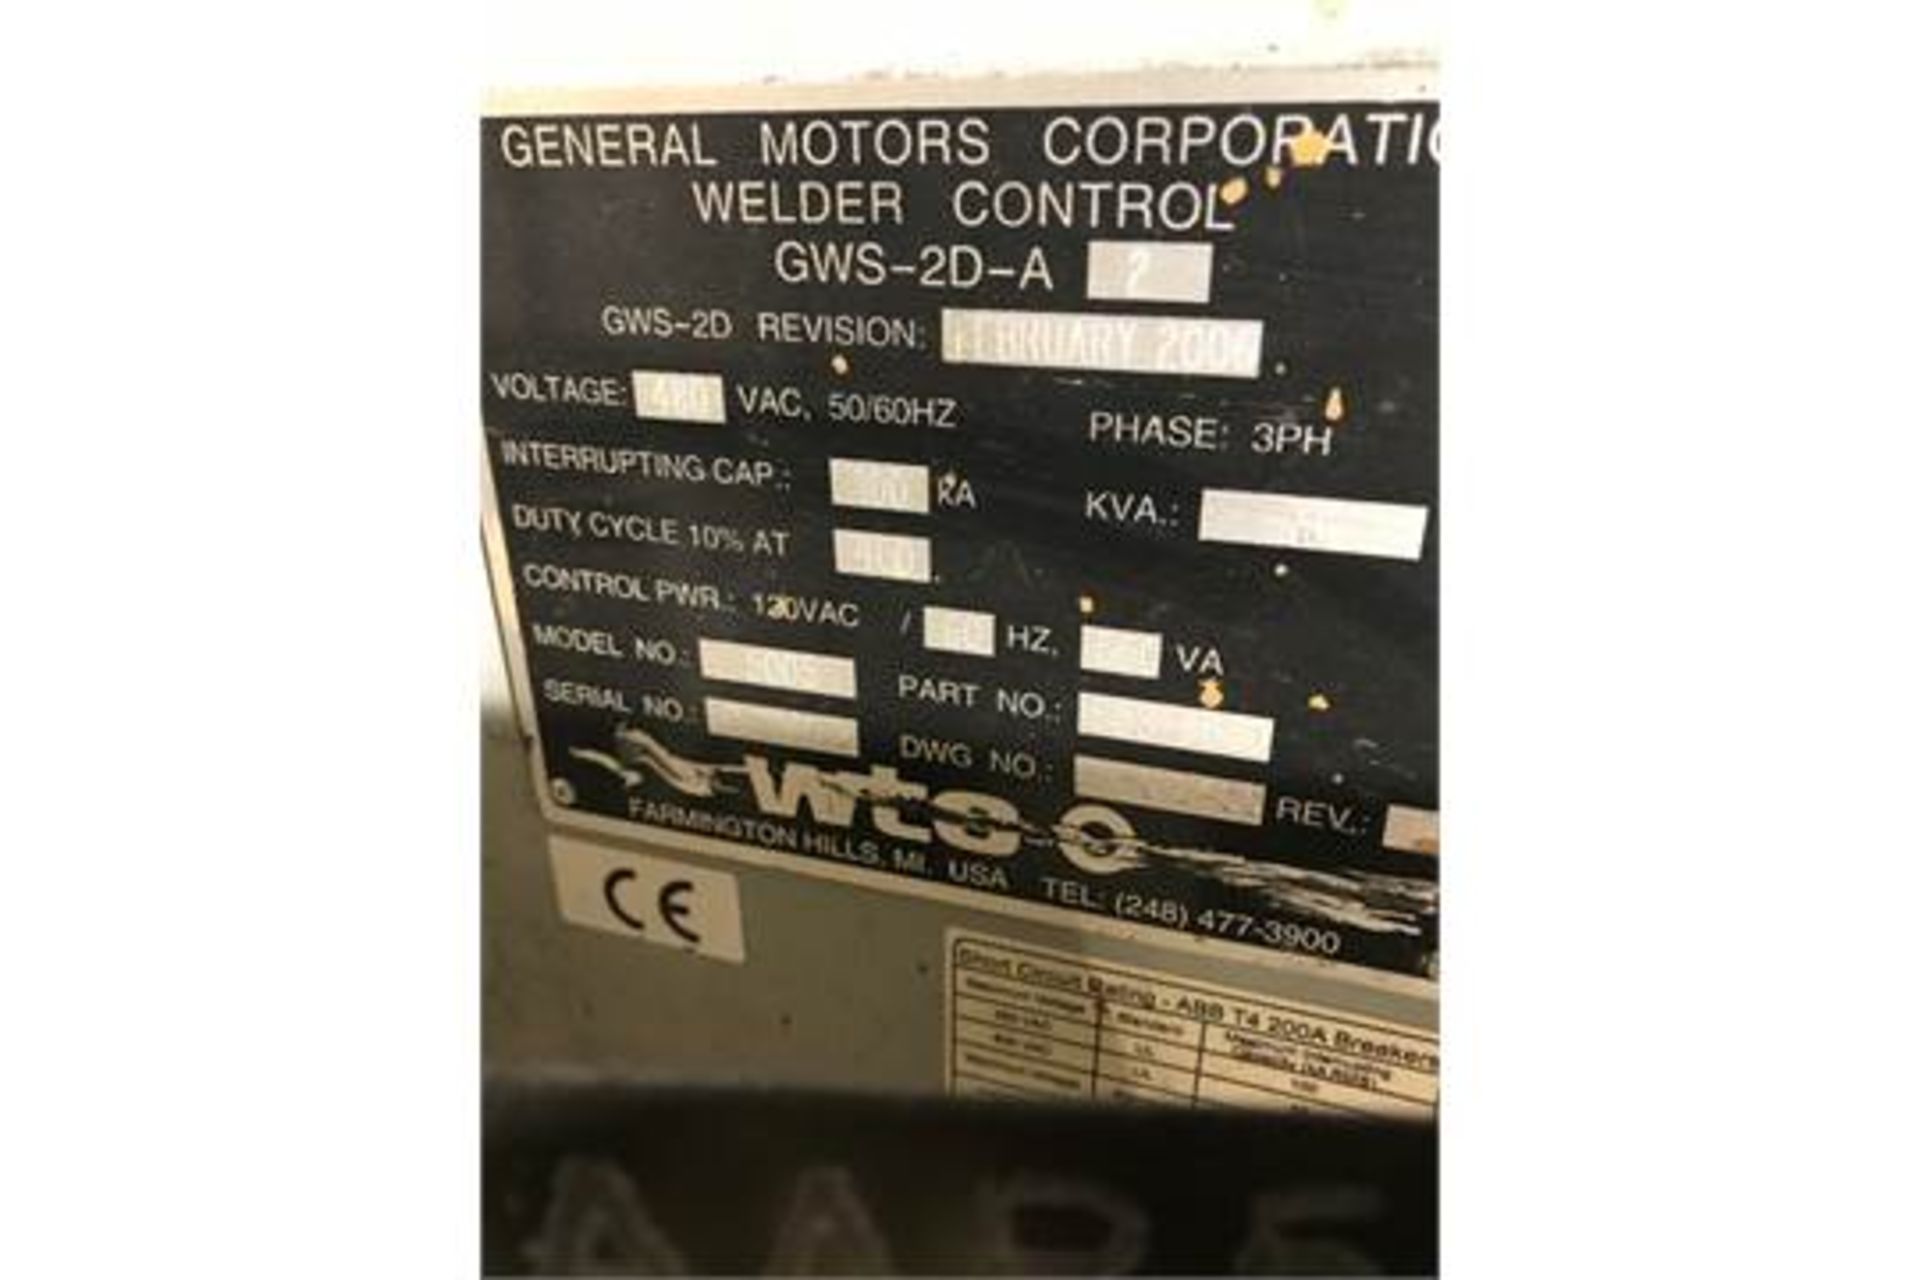 LOT OF 3 WTC 5005 500 KVA SPOT WELD CONTROLLER, LOCATION MI, BUYER TO SHIP - Image 2 of 2